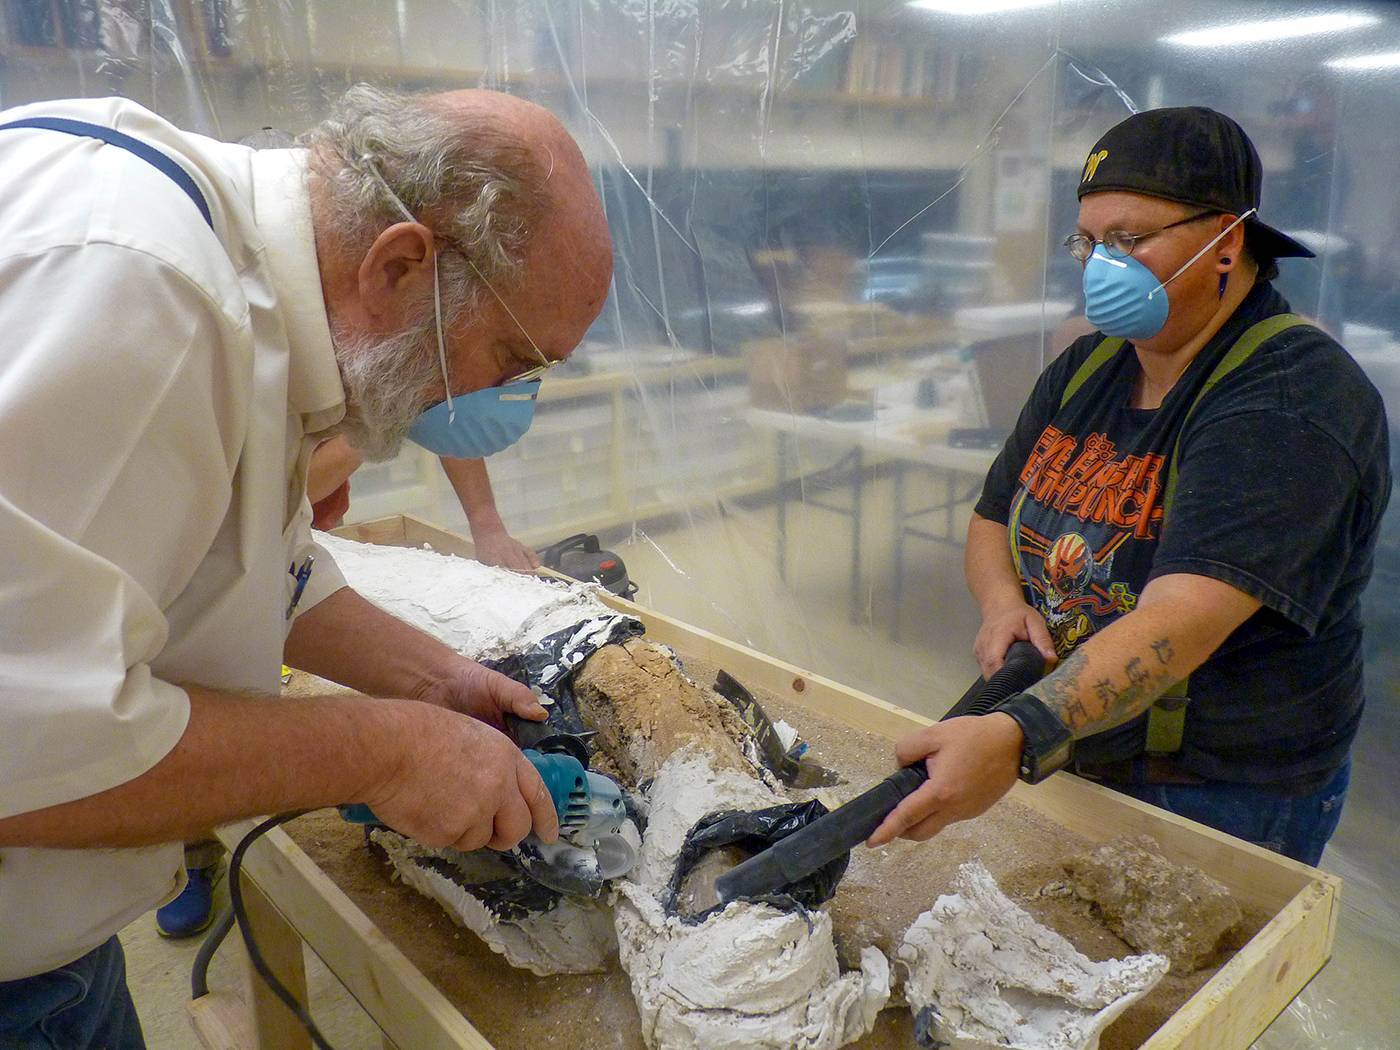 WSU student and professor work to excavate a mammoth tusk discovered in Cunningham, Kansas